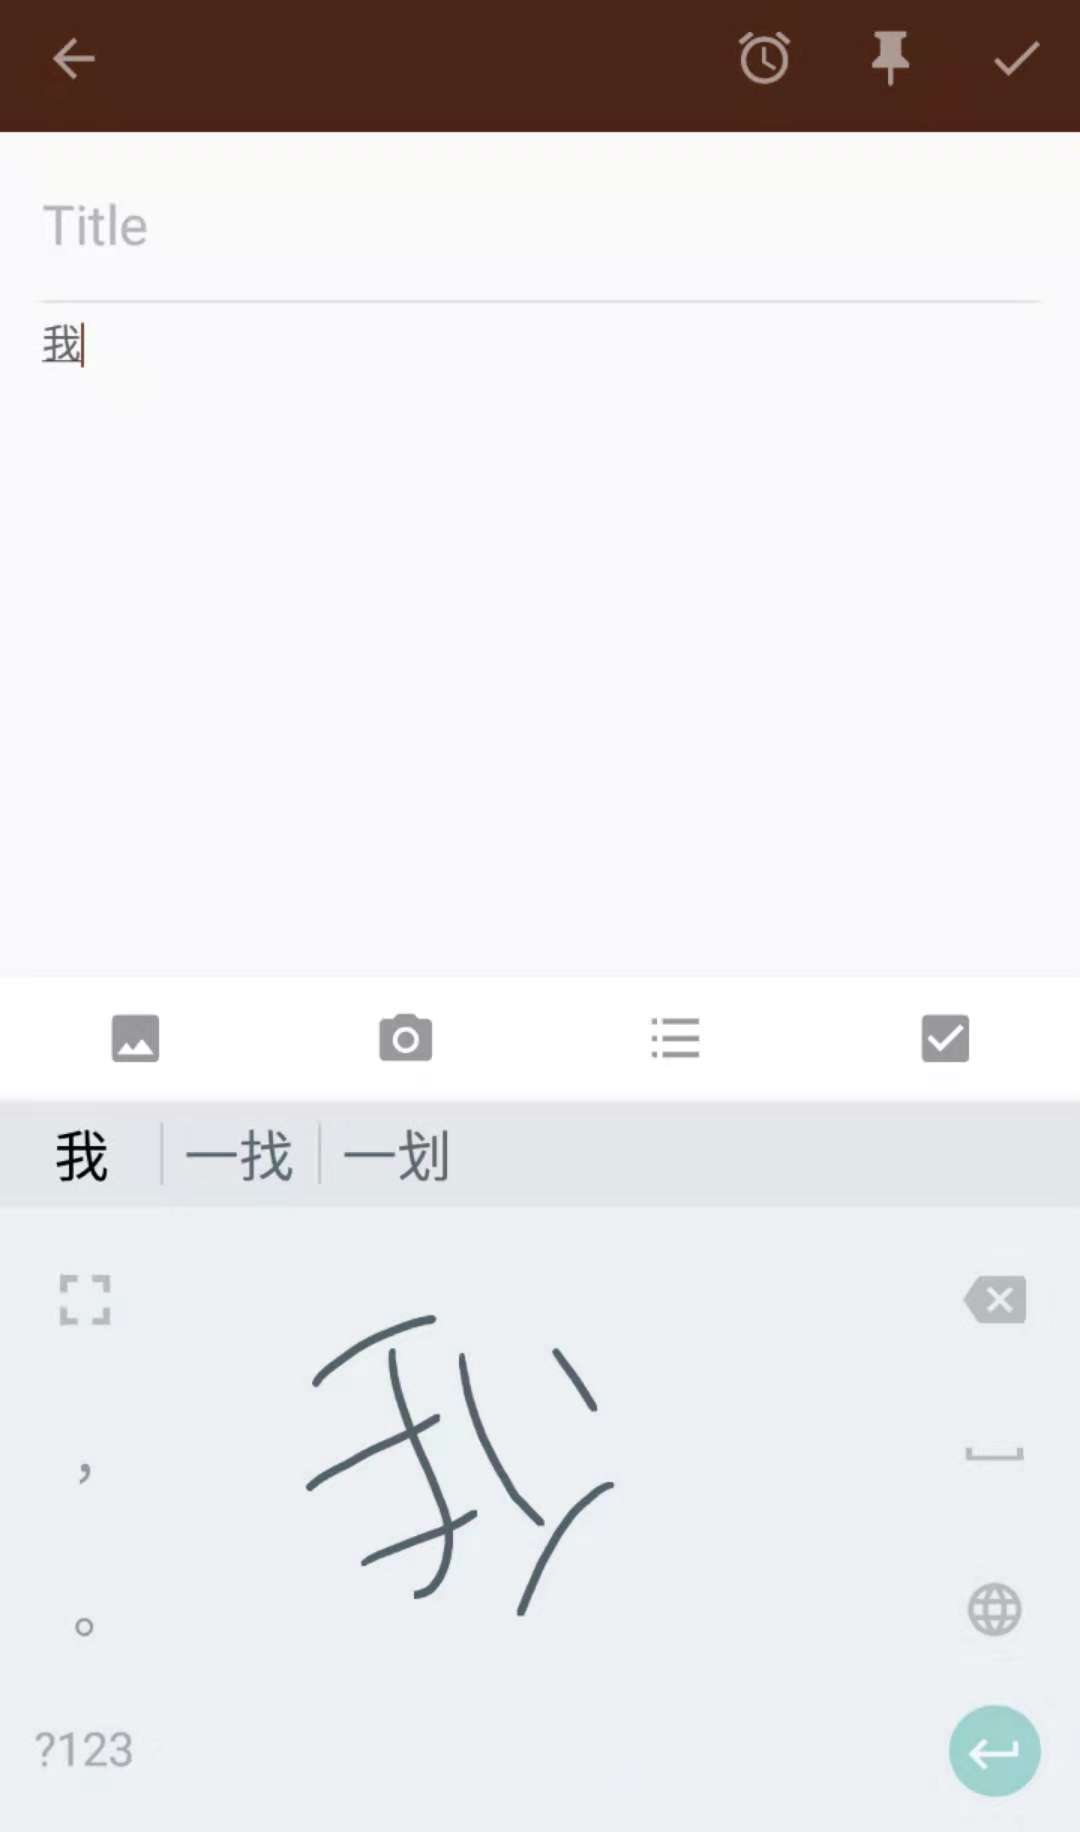 Chinese Keyboard: Writing out Chinese characters